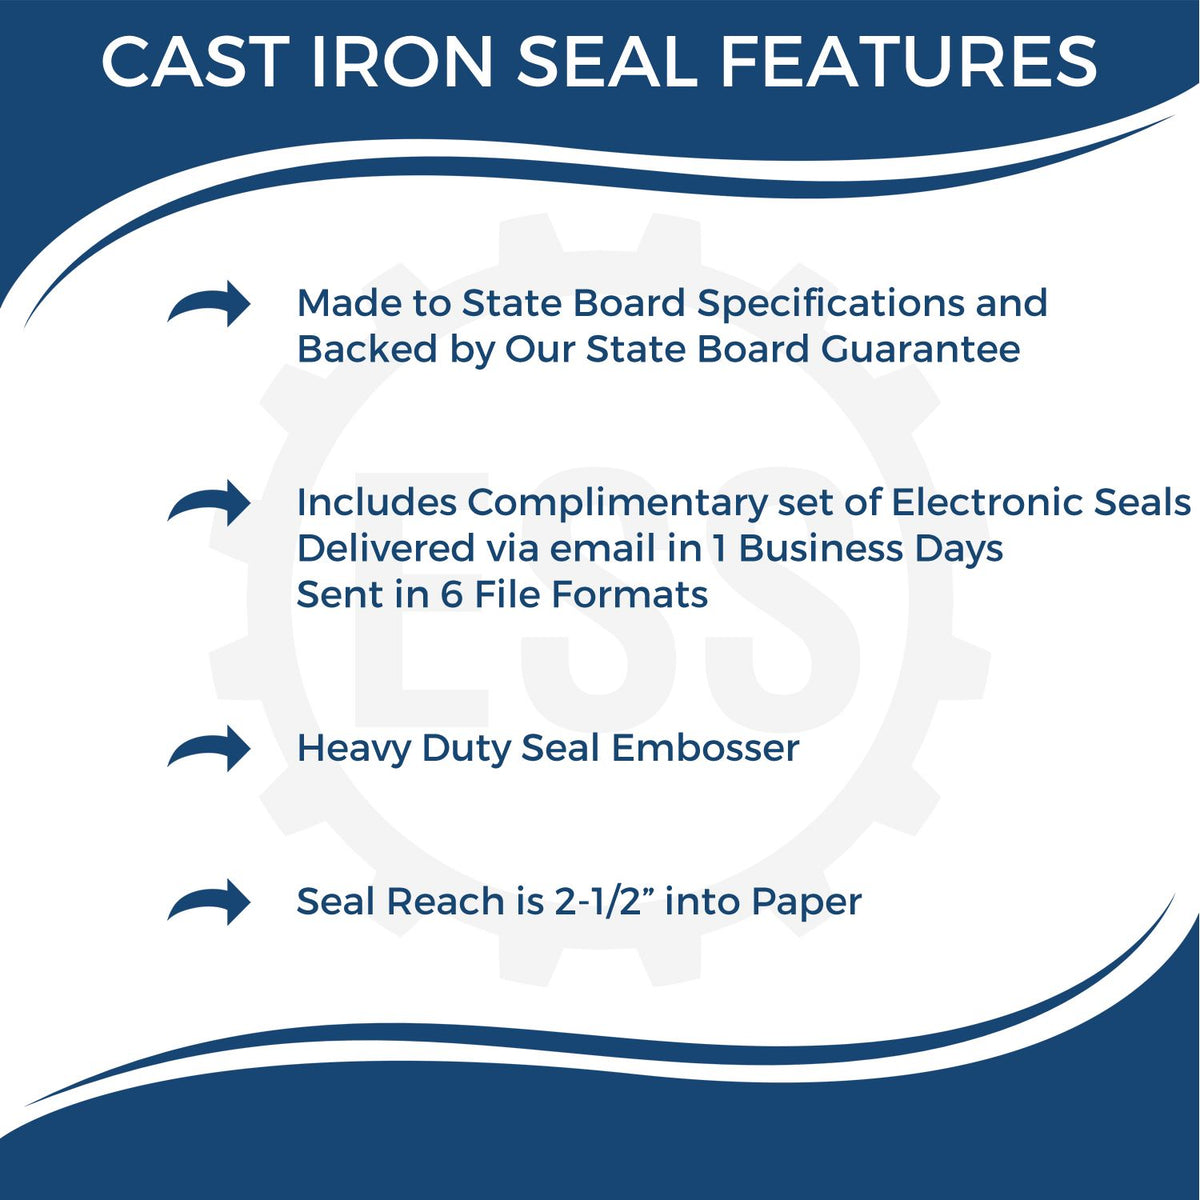 A picture of an infographic highlighting the selling points for the Heavy Duty Cast Iron Florida Geologist Seal Embosser